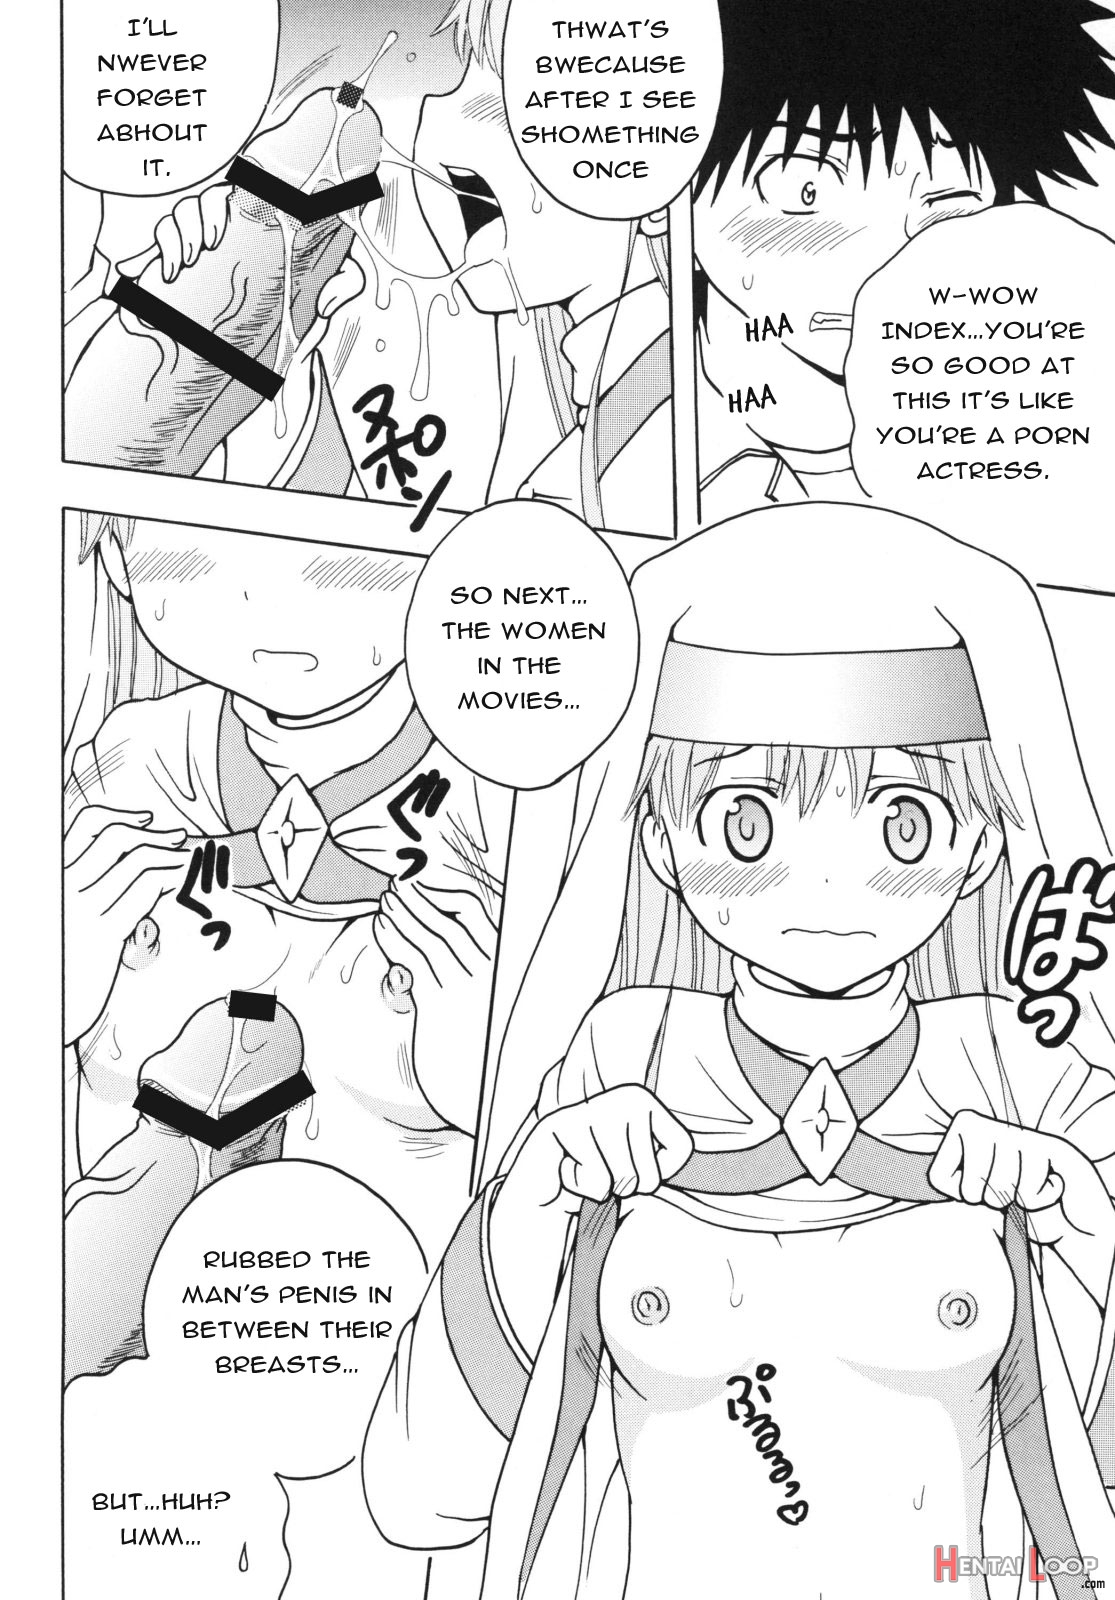 A Certain Magical Lewd Index #2 page 28